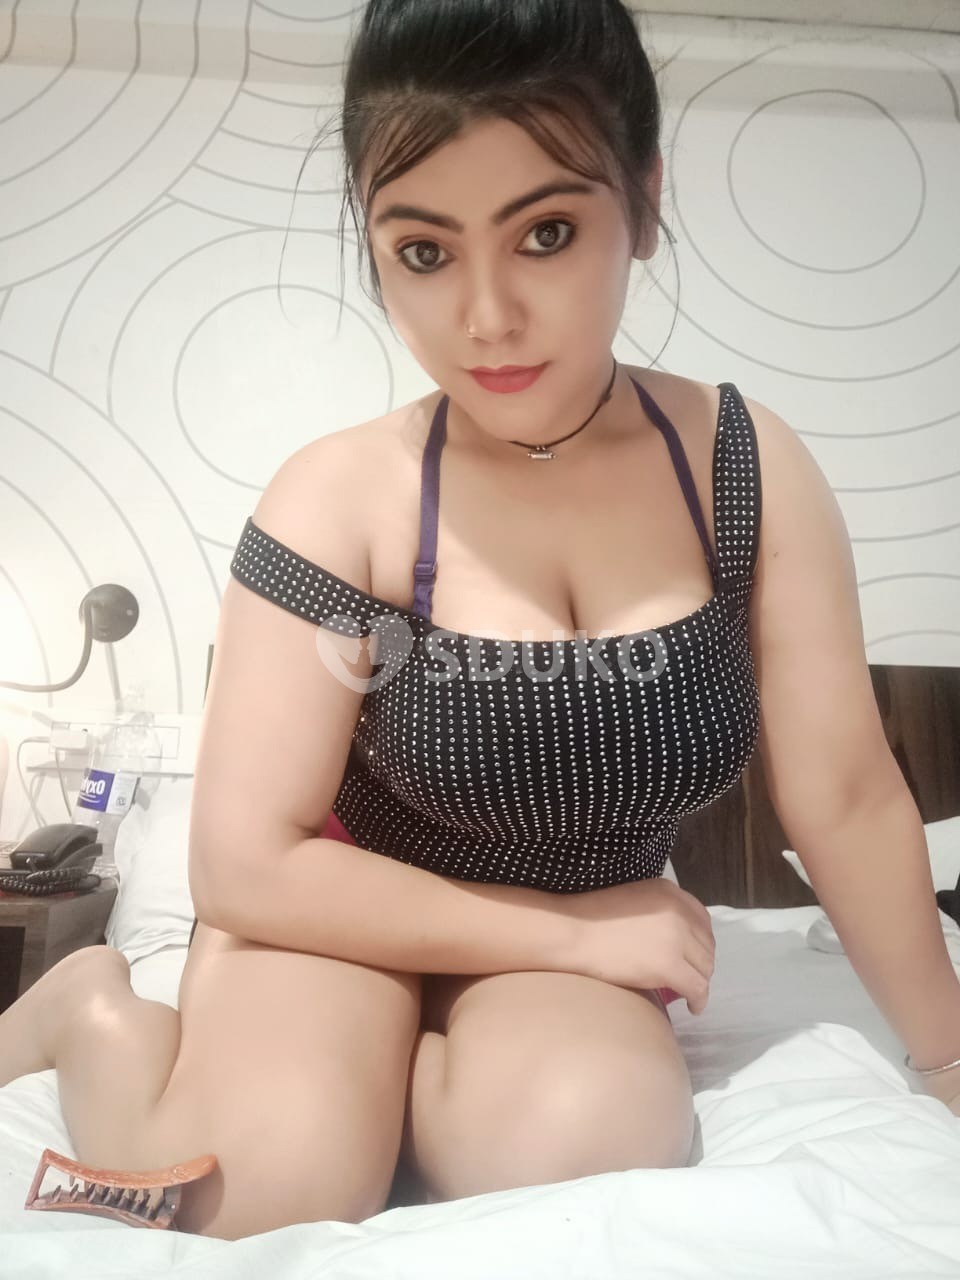 Monika Pandey LOW PRICE🔸✅ SERVICE AVAILABLE 100% SAFE AND SECURE UNLIMITED ENJOY HOT COLLEGE GIRL HOUSEWIFE AUNTIE 